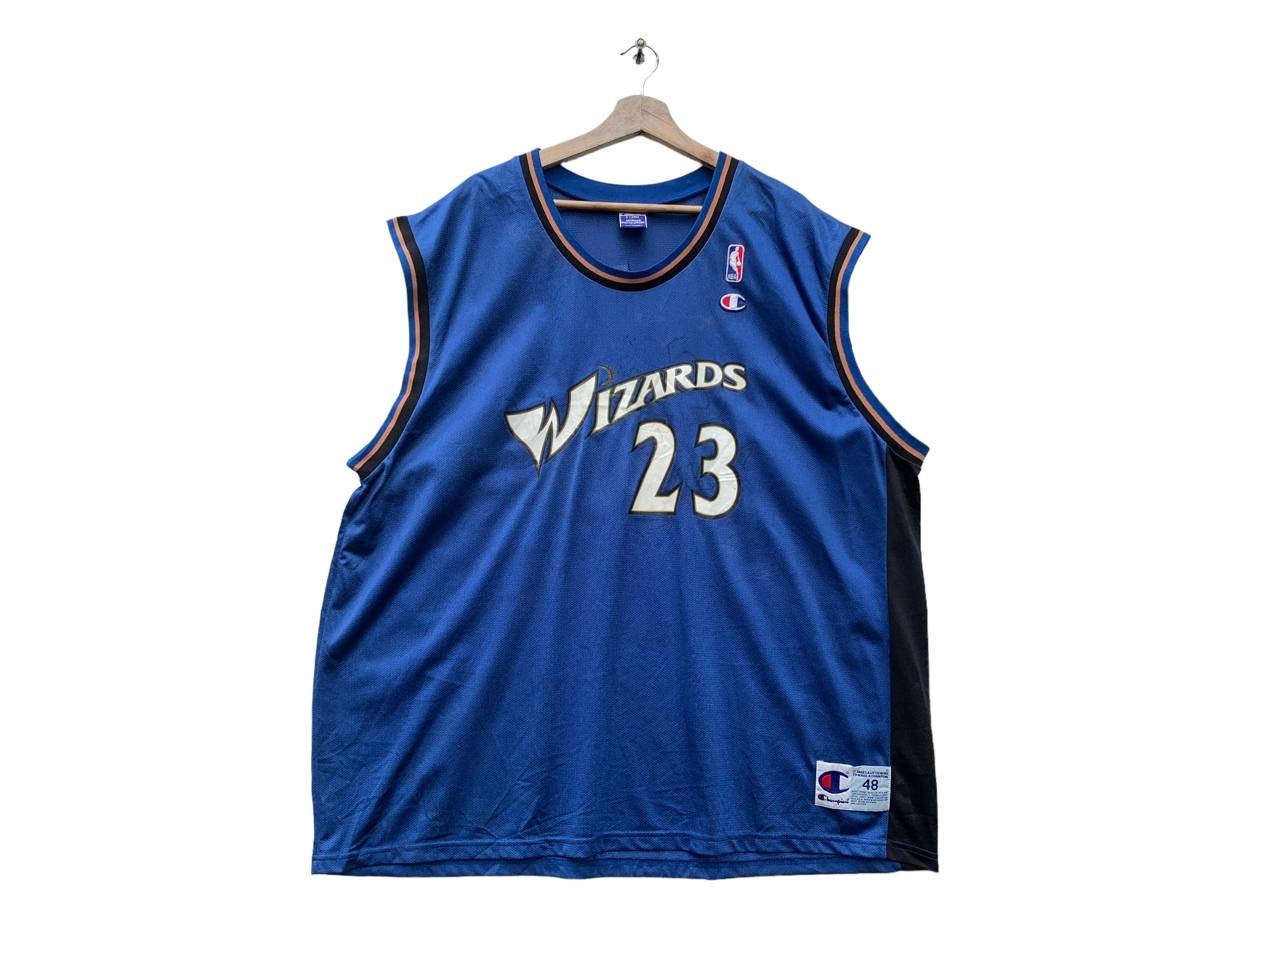 Champion Wizards #23 Replica Jersey Mens Style : 401987